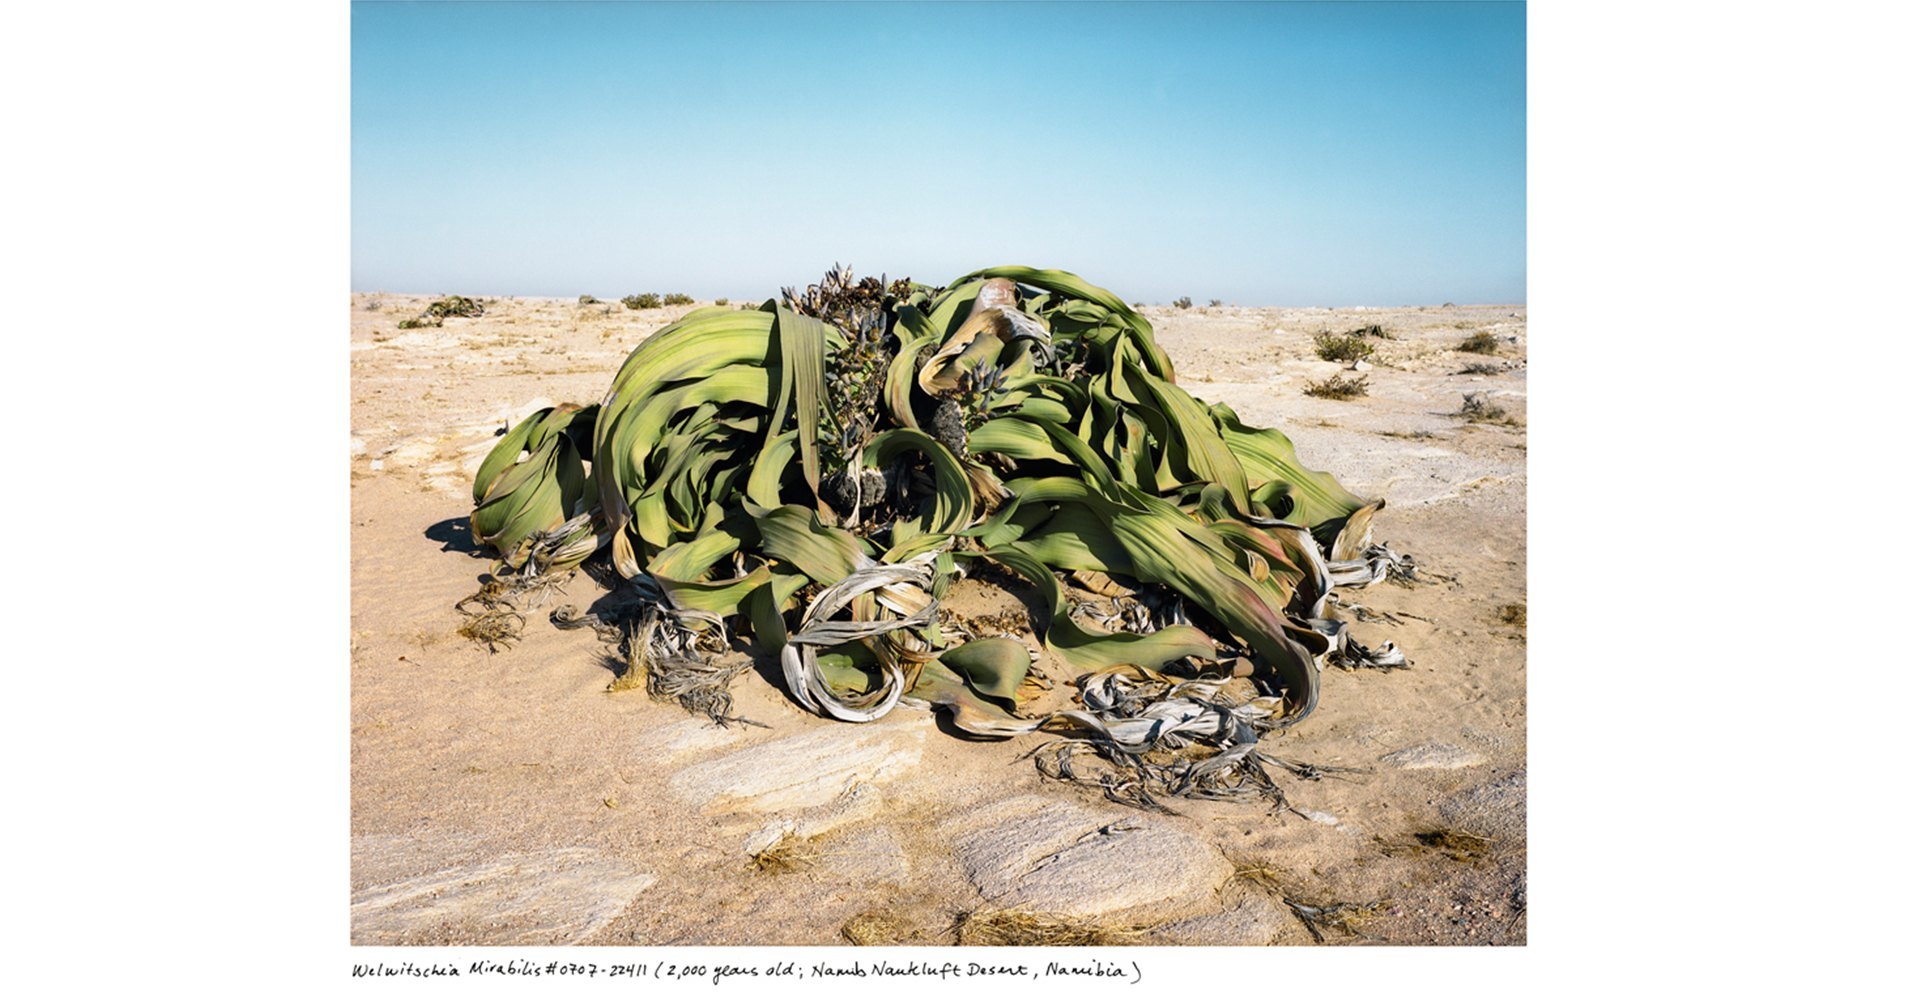 Rachel Sussman: The Oldest Living Things in the World